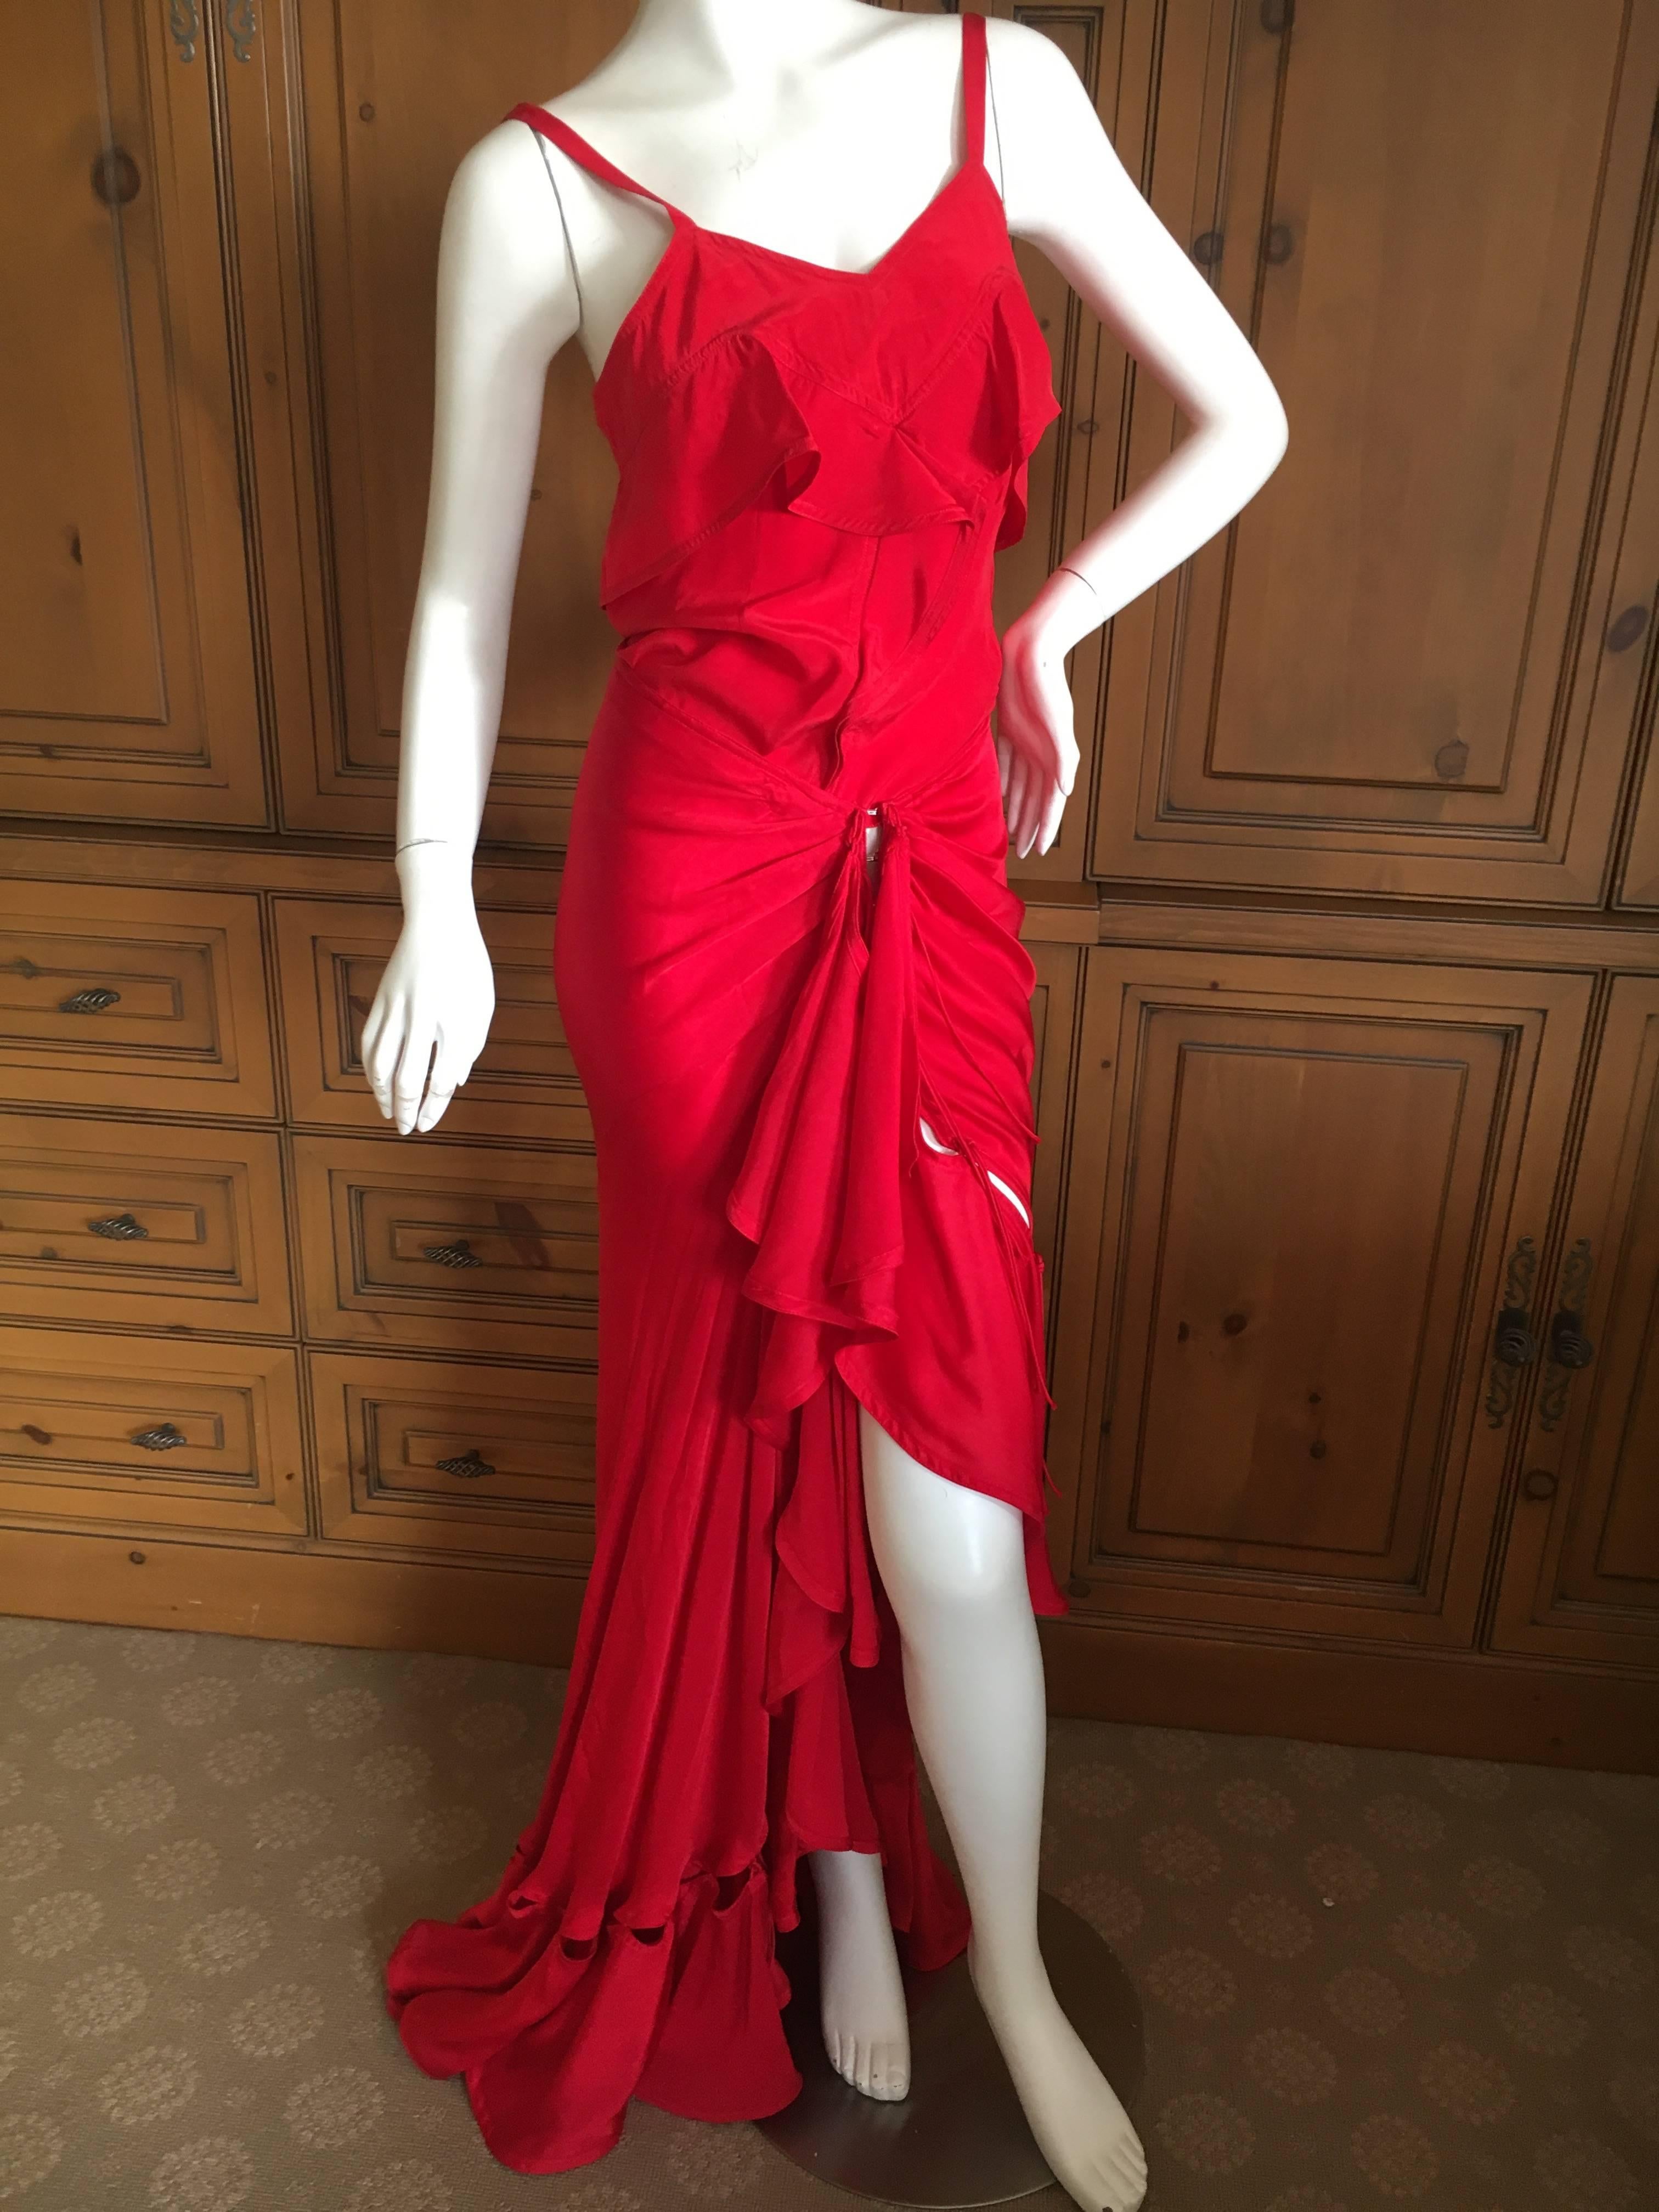 Yves Saint Laurent by Tom Ford Fall 2003 Red Two Piece Evening Dress 1